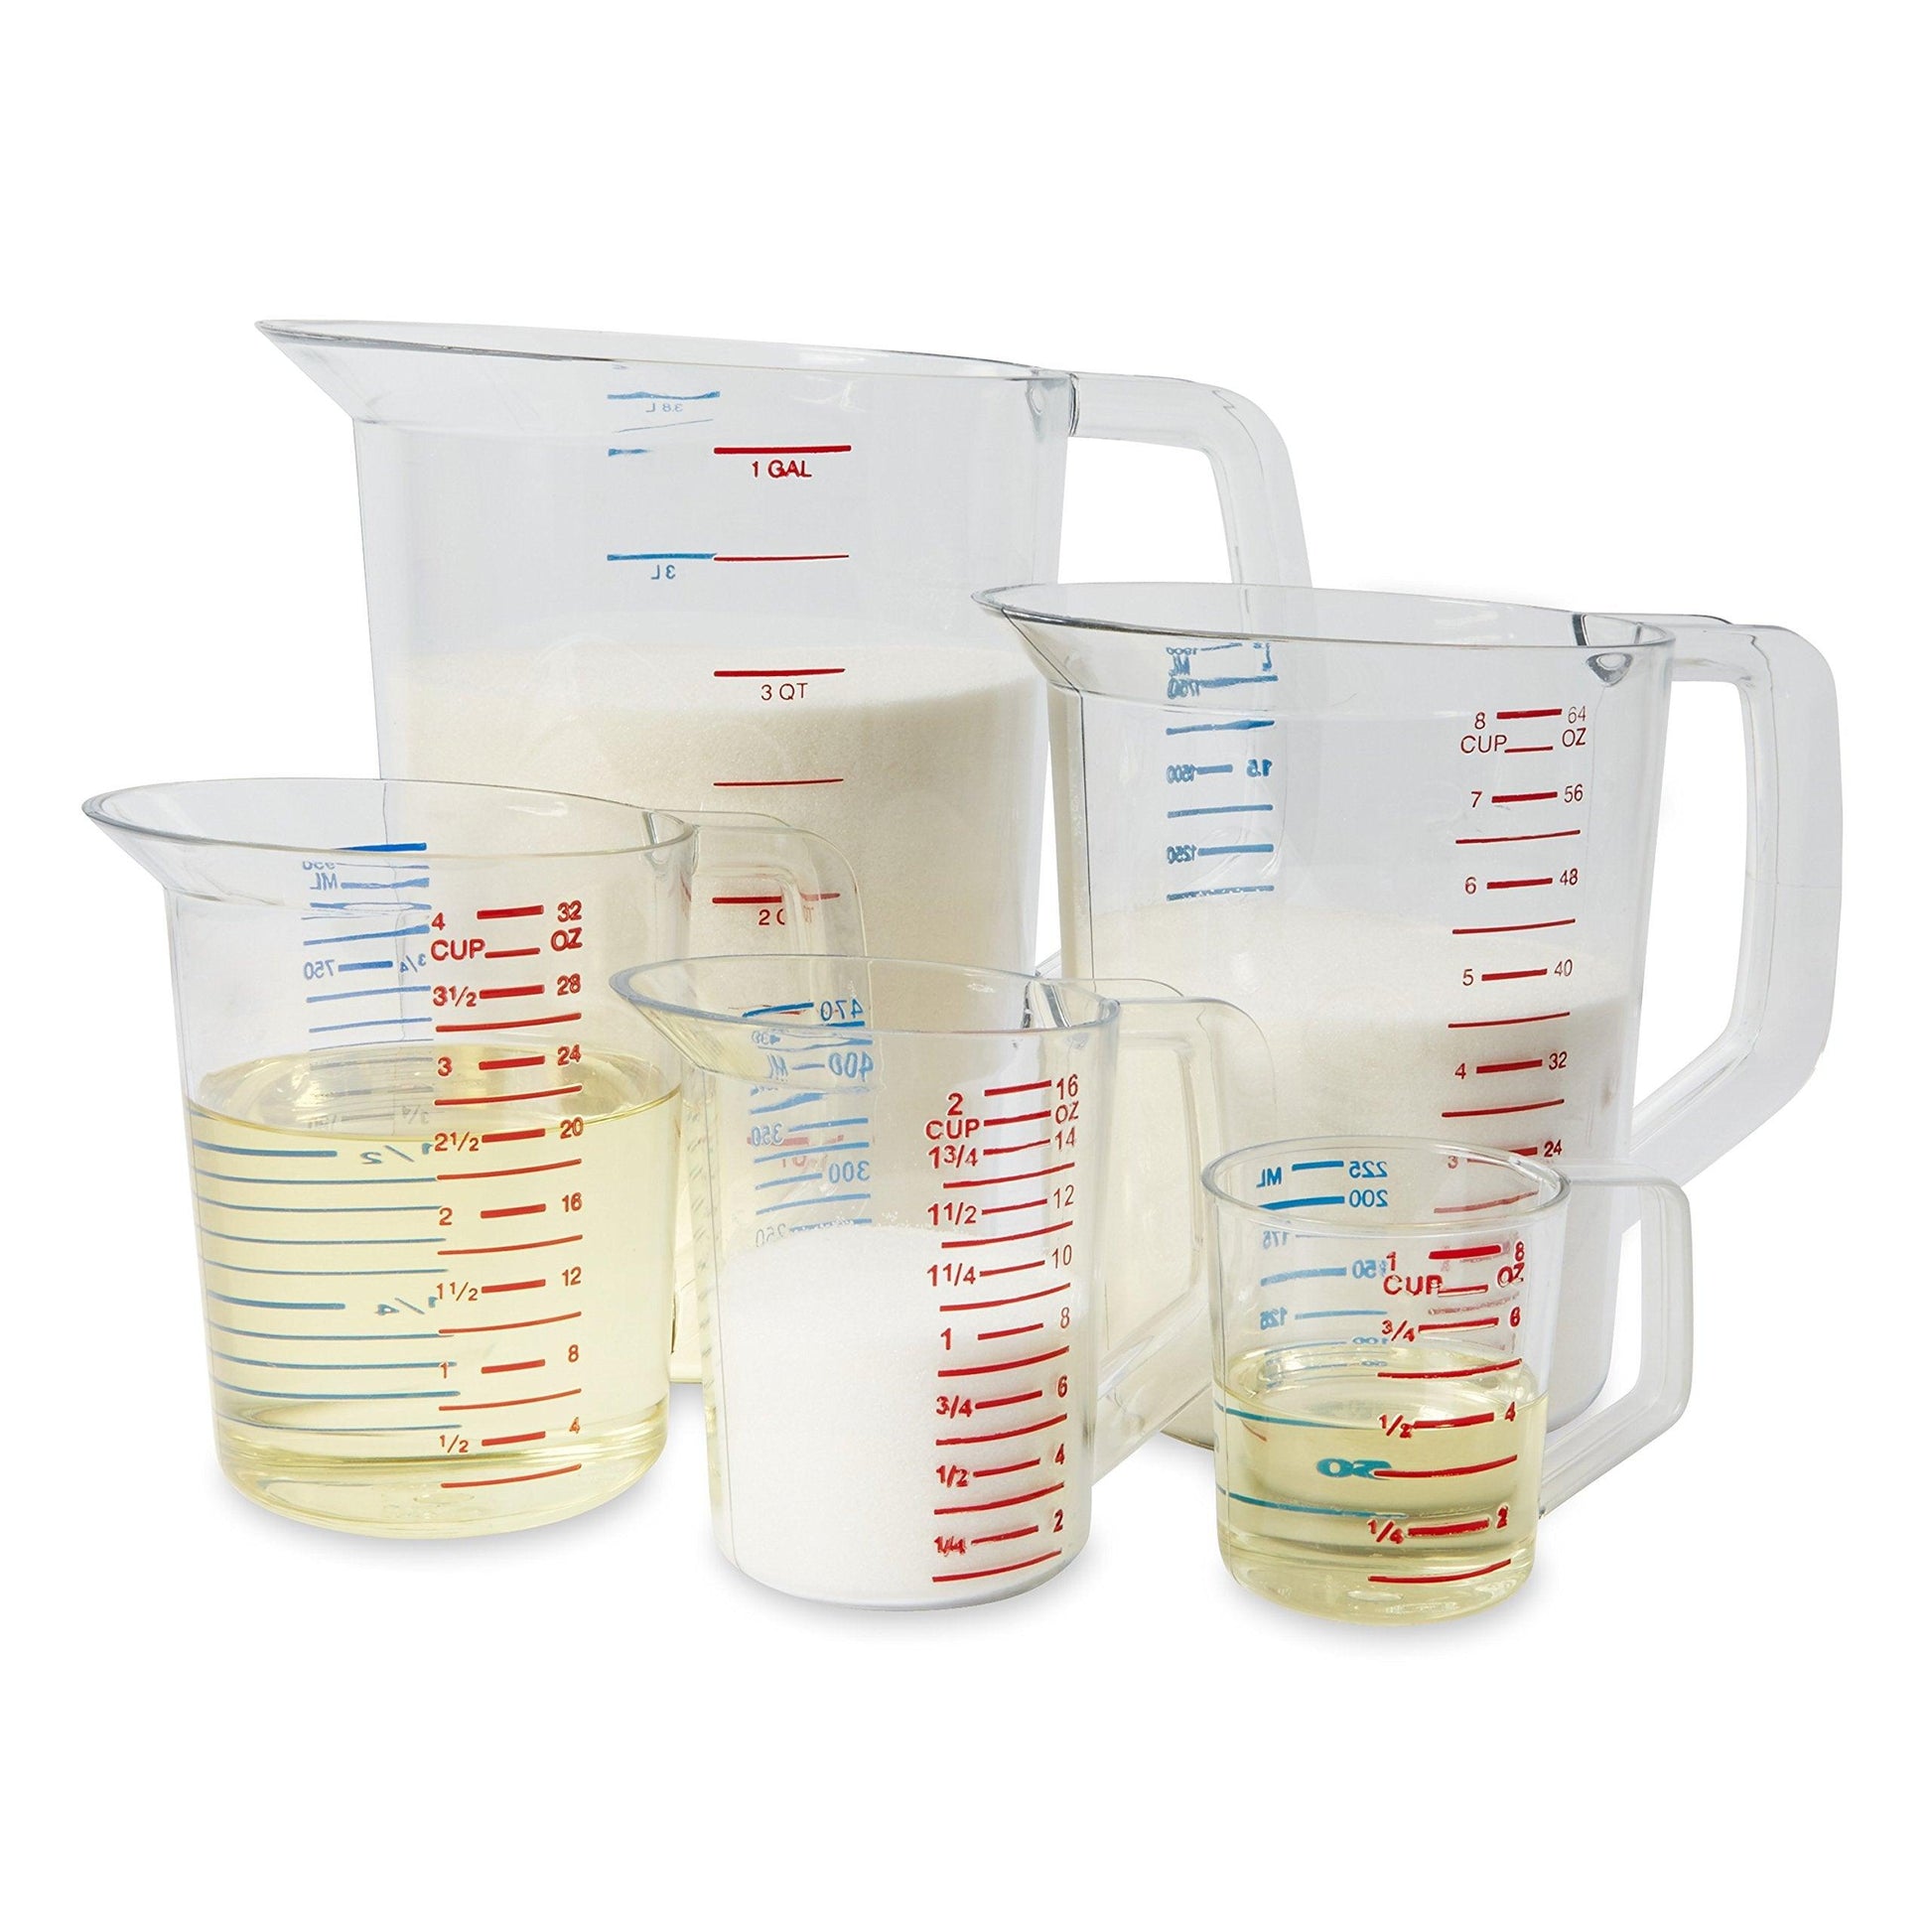 Rubbermaid Commercial Products Bouncer Clear Measuring Cup, 1-Cup, Clear, Strong Food Grade, for use with -40-degree F to 212-degree F, Easy Read for Liquid/Dry Ingredients while Cooking - CookCave